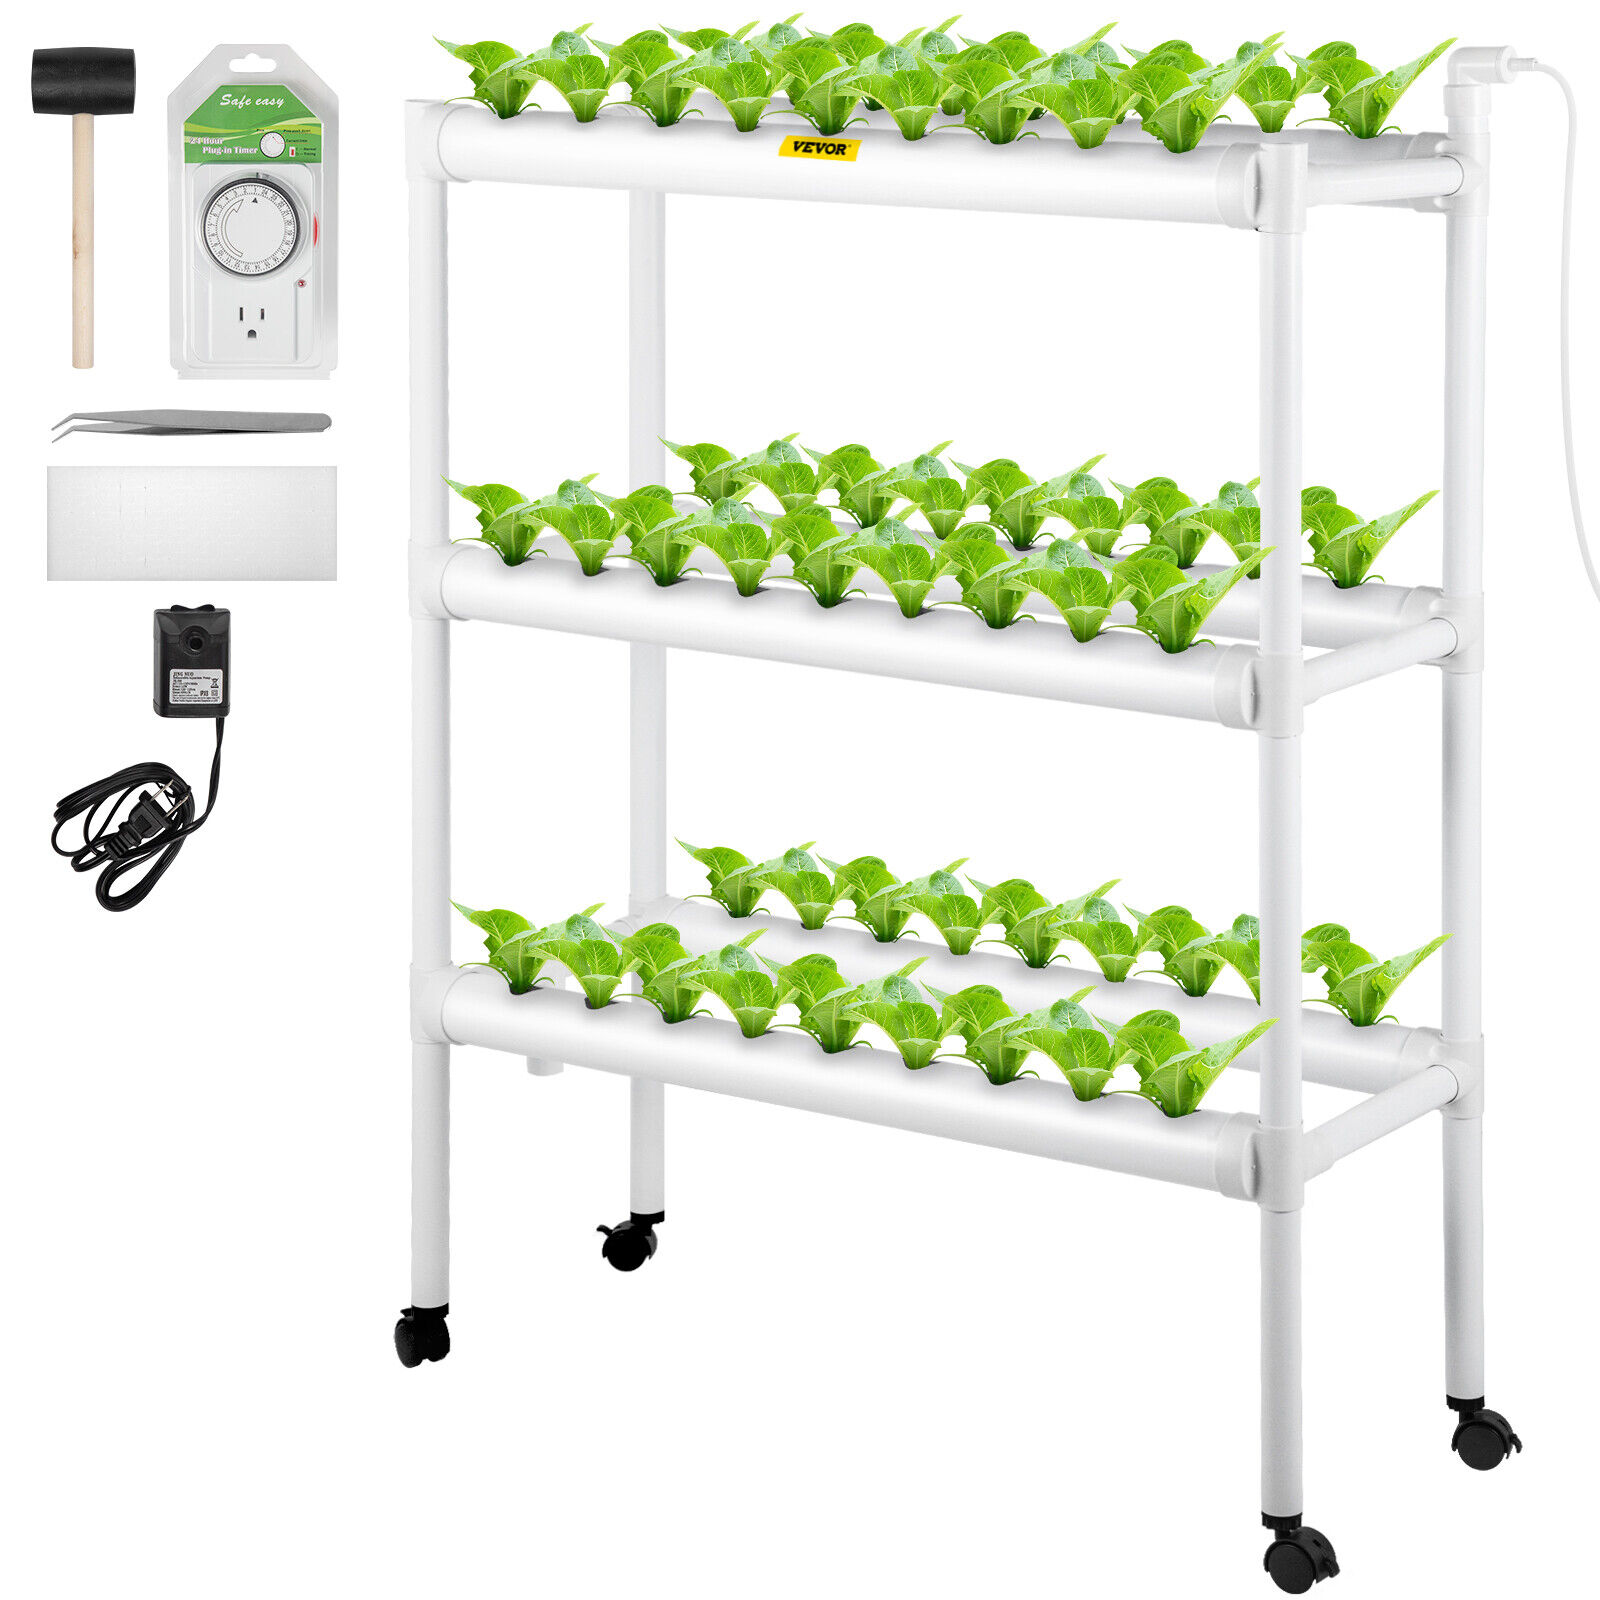 VEVOR Hydroponic Grow Kit Hydroponics System 54 Plant Sites 3 Layers 6 Pipes